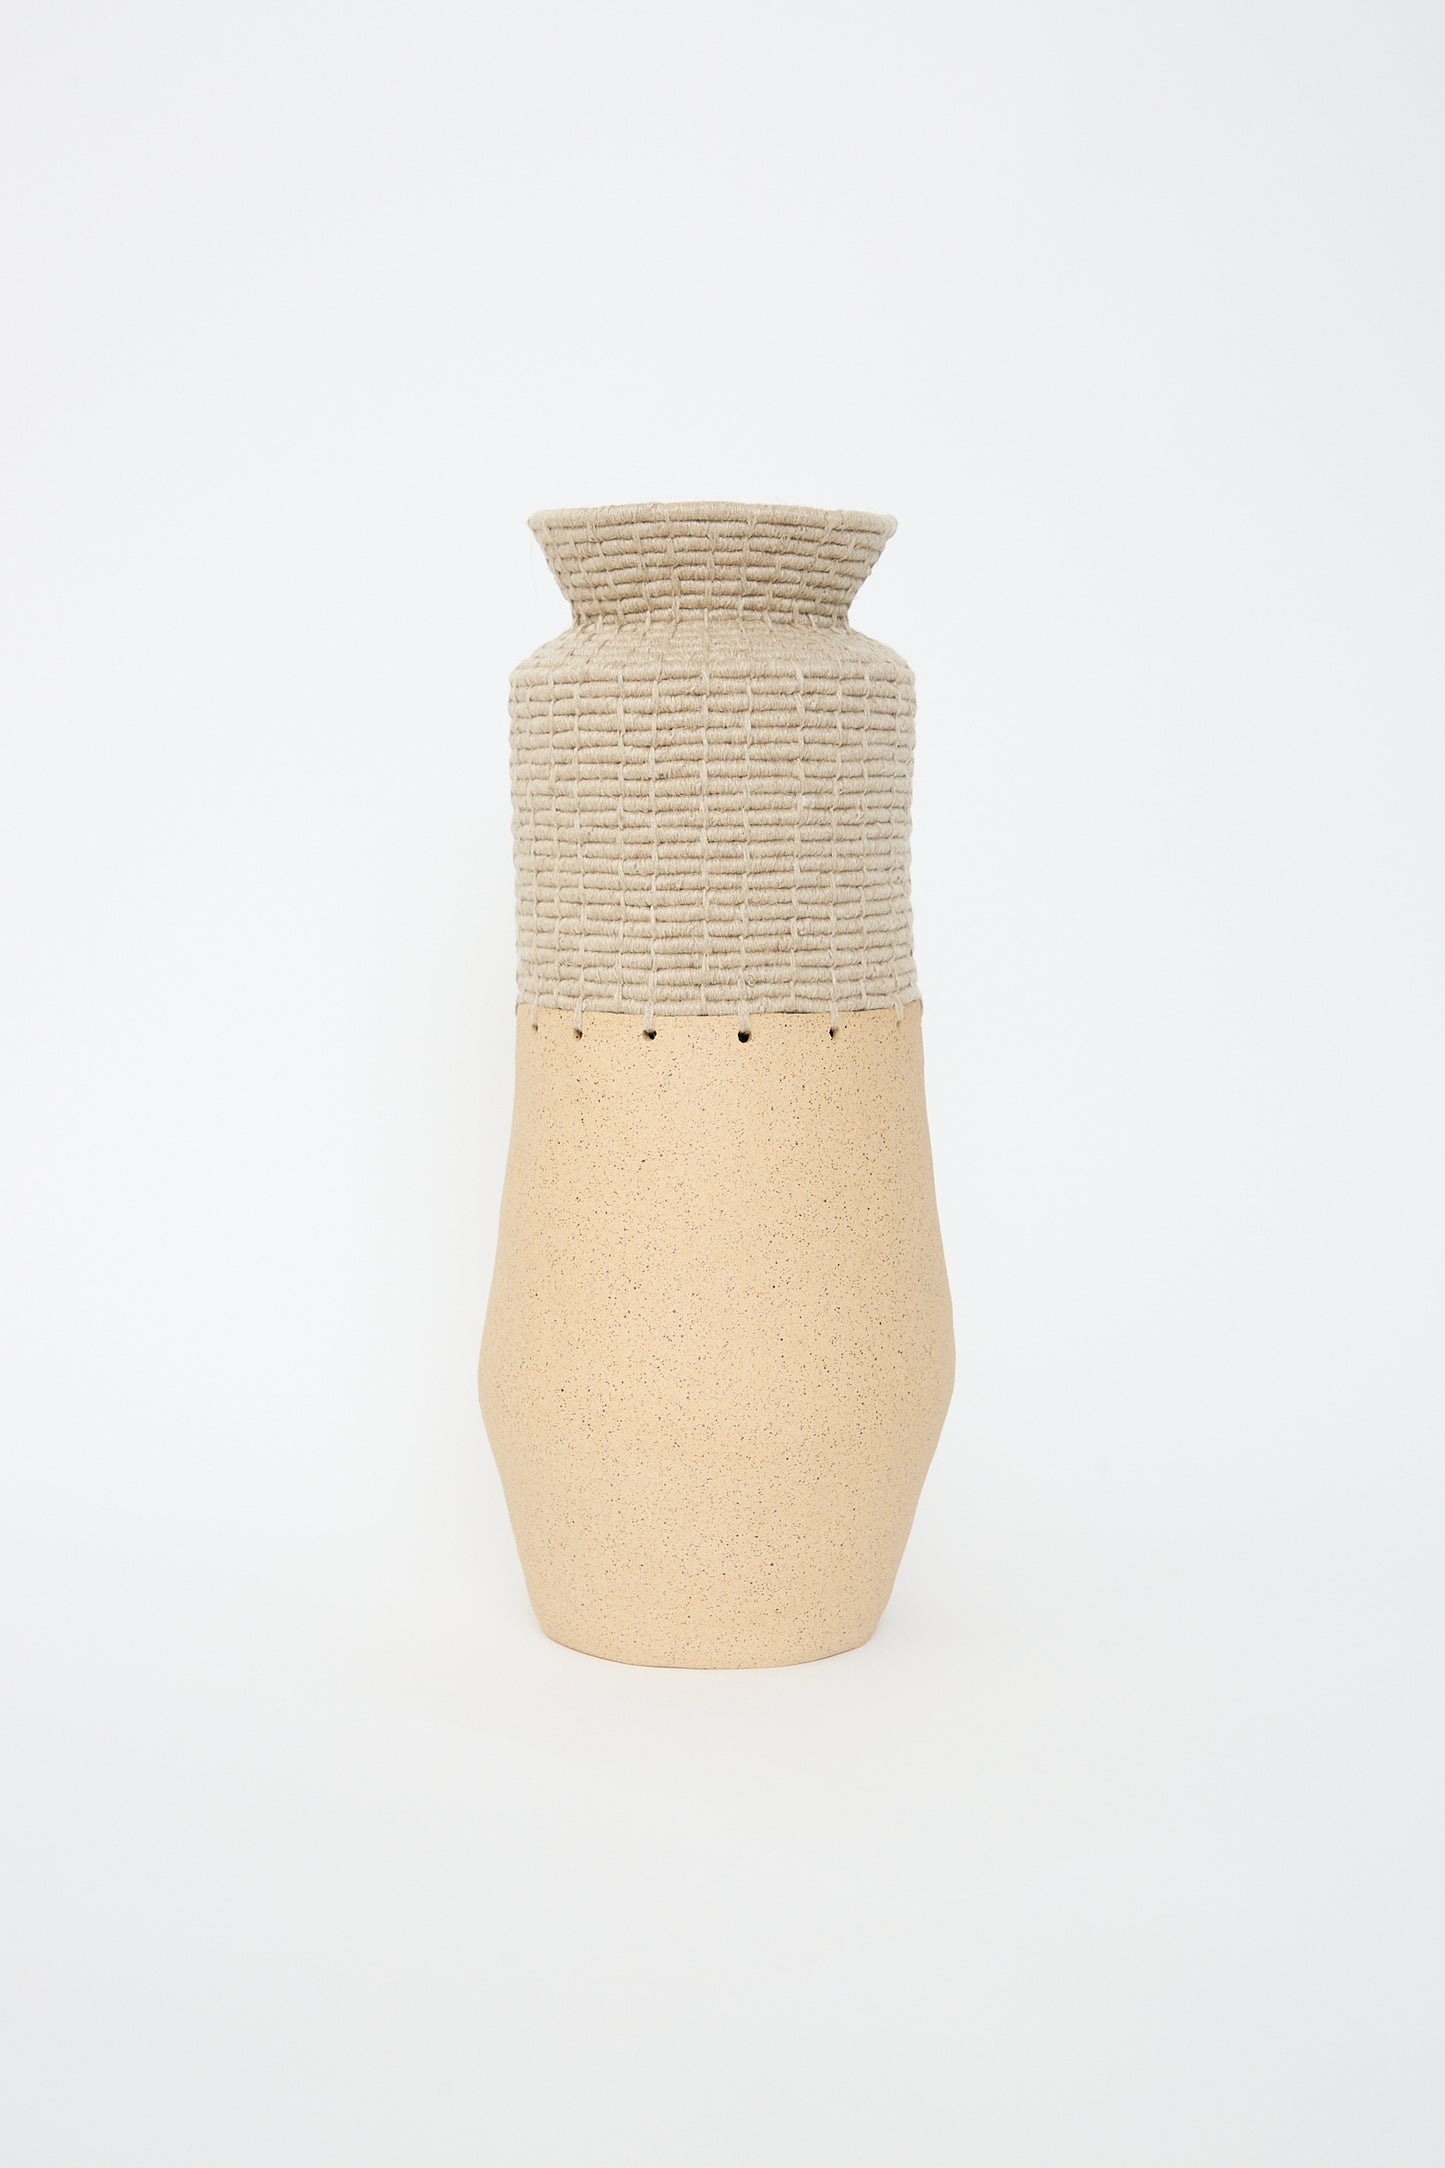 Handcrafted Karen Tinney ceramic Vessel #763 in Natural from California against a white background.